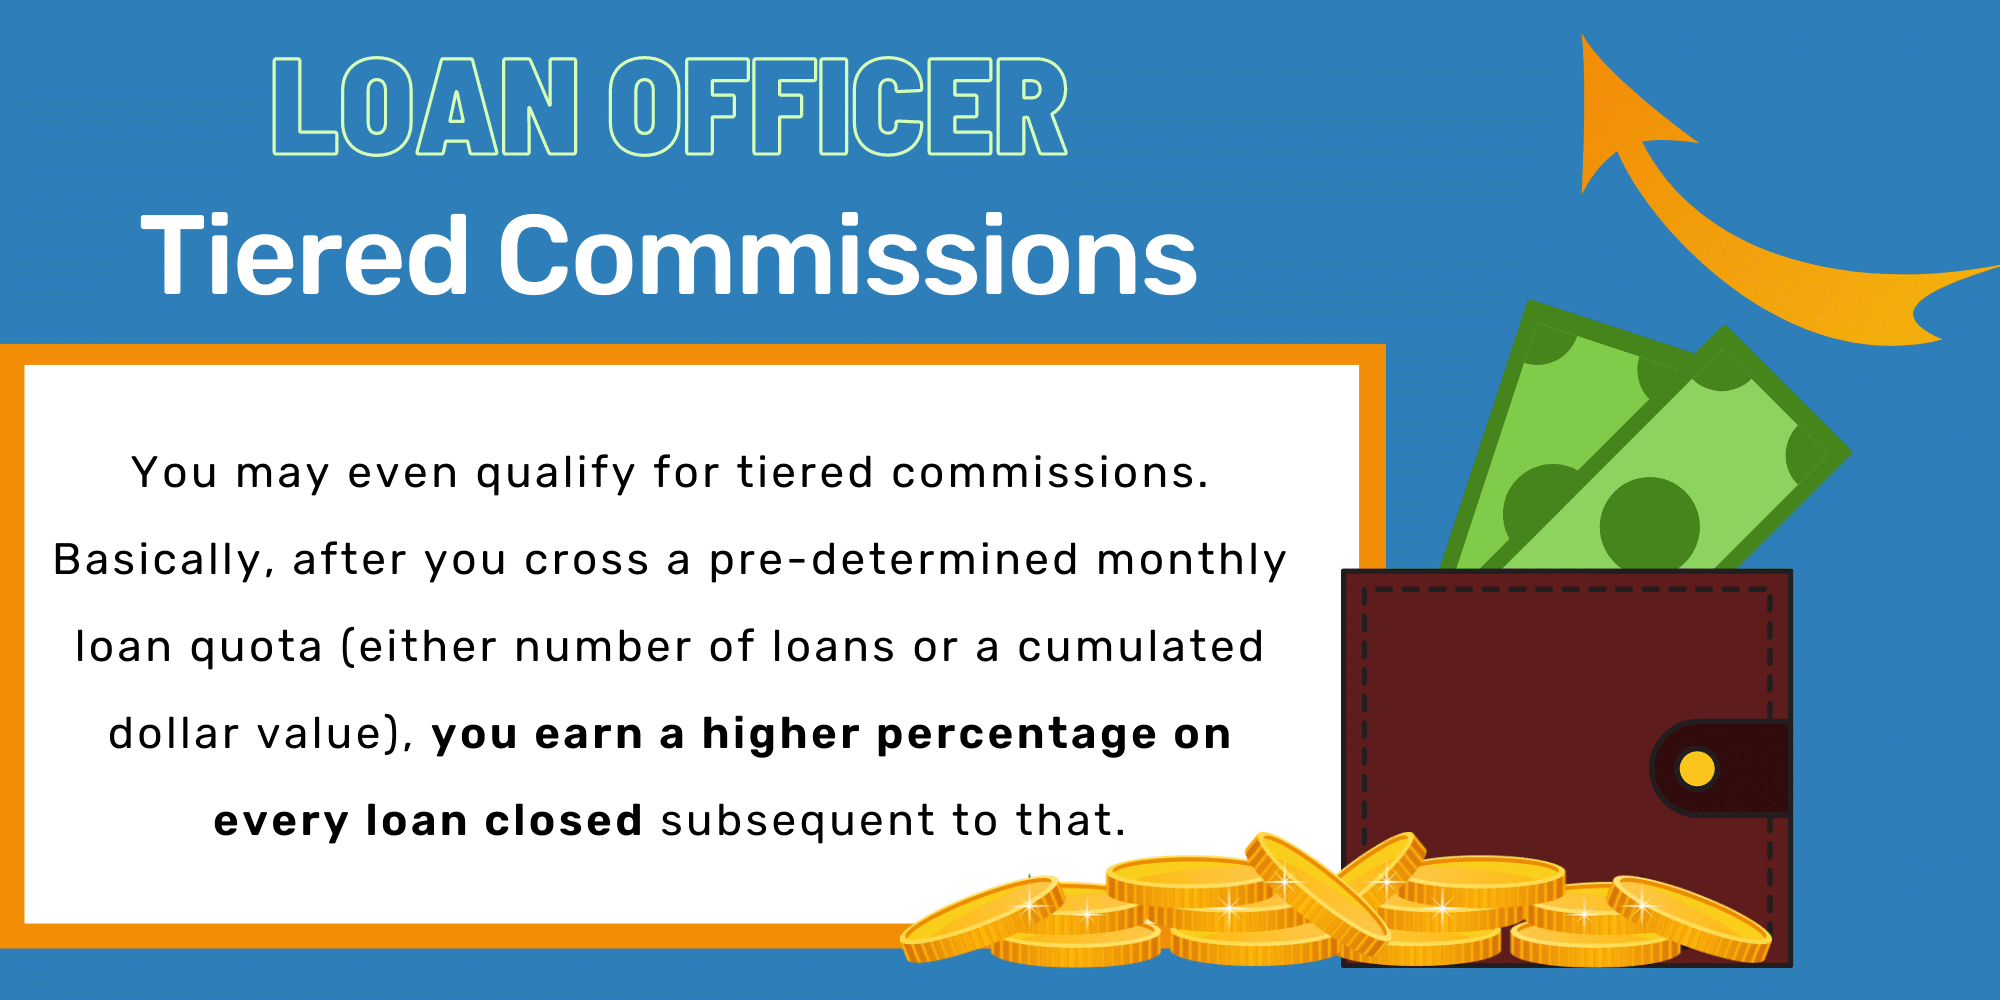 Mortgage Loan Officer Tiered Commissions in Oregon